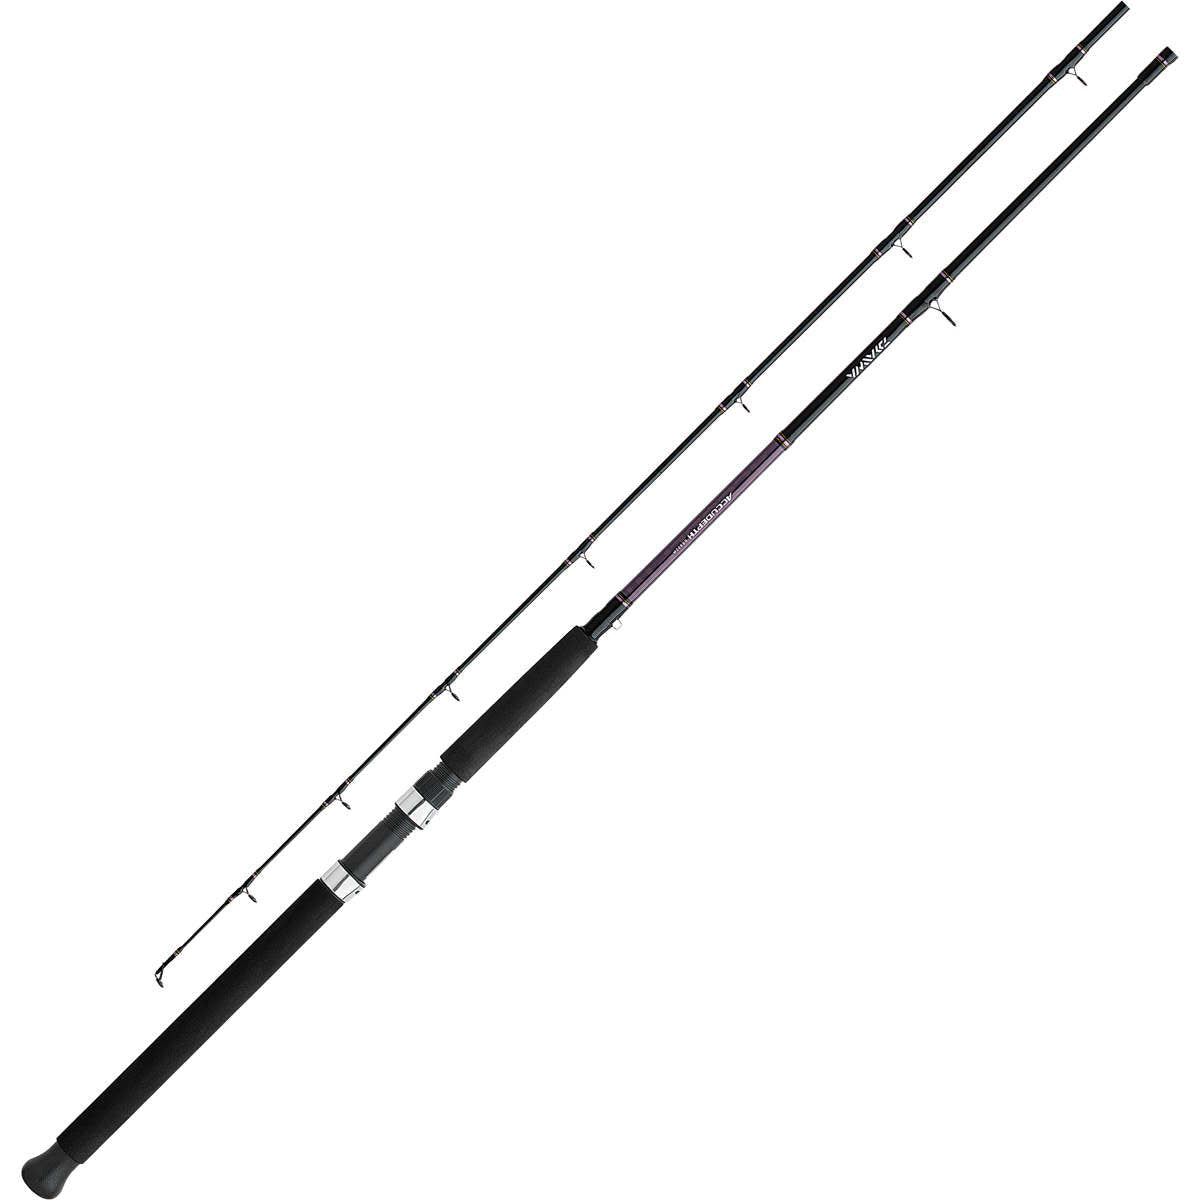 Photo of Daiwa Accudepth Specialty Series Planar Board Trolling Rod for sale at United Tackle Shops.